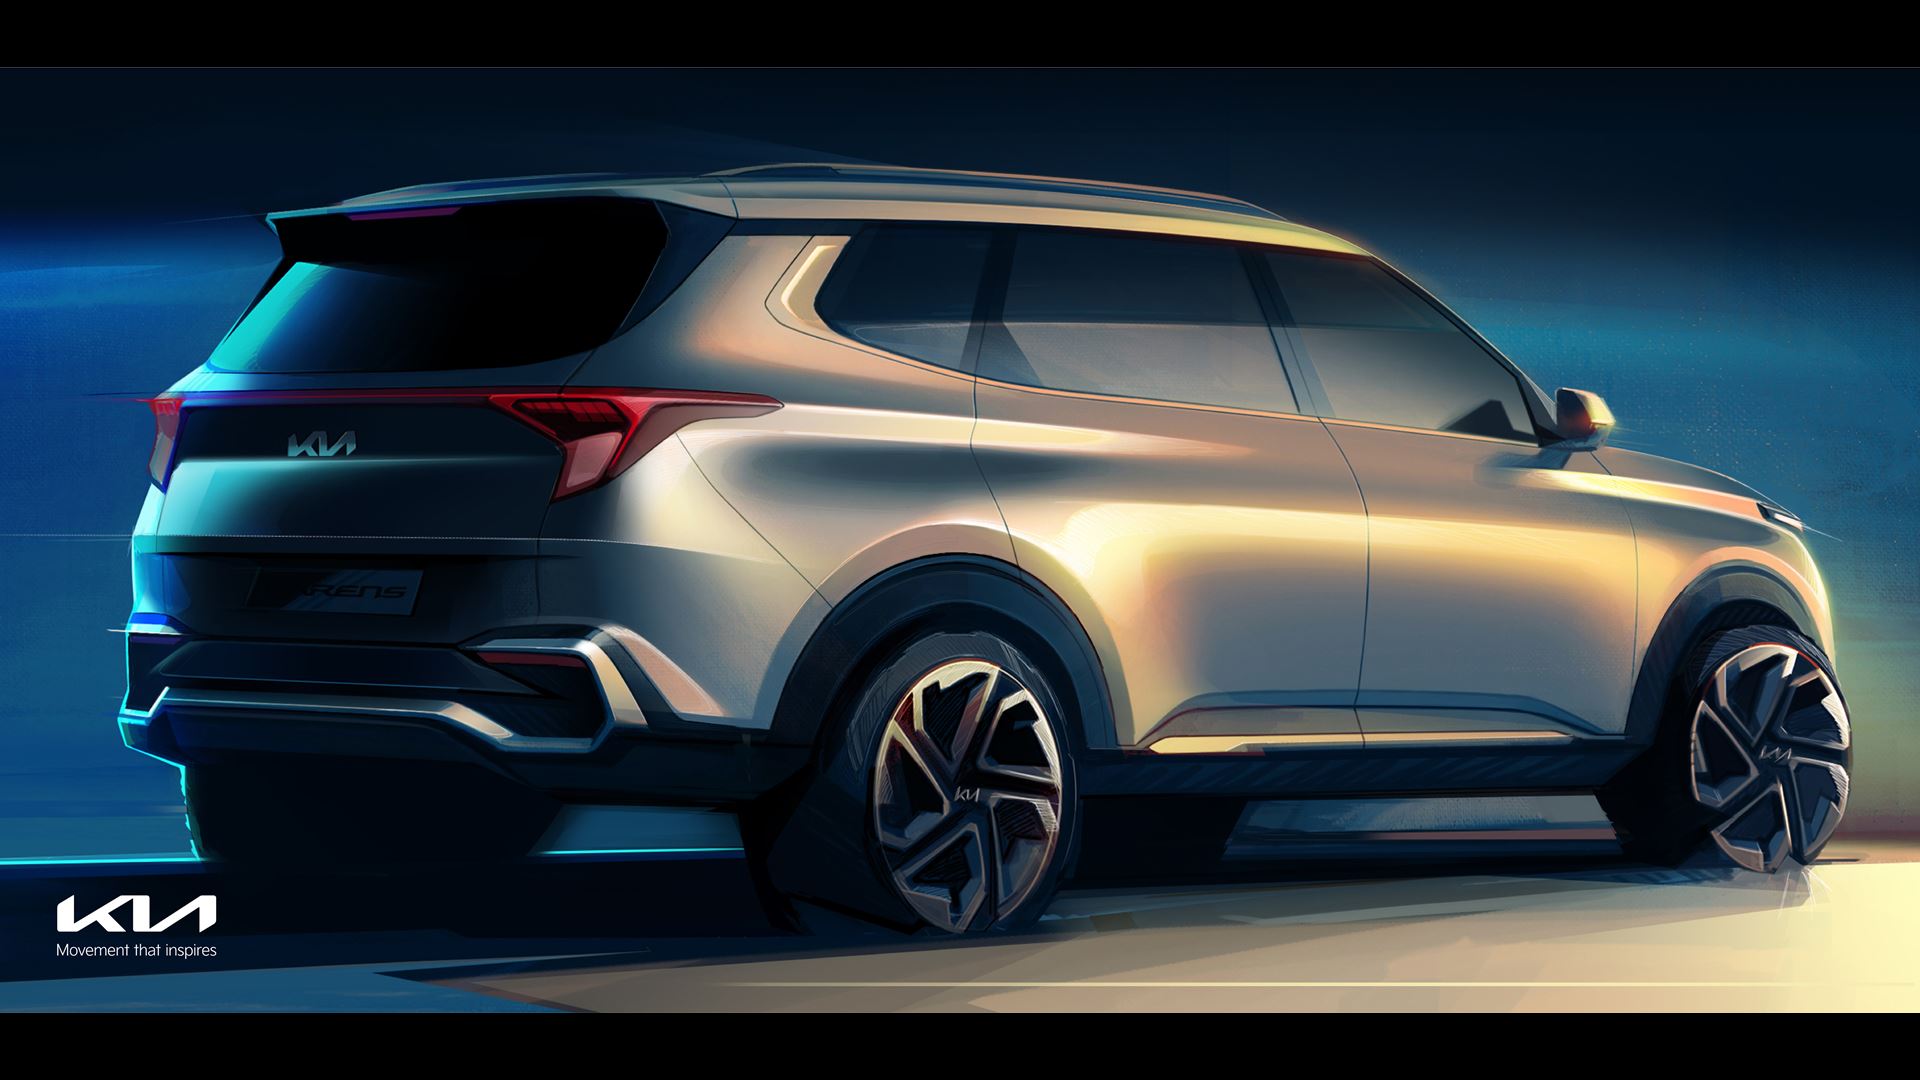 Kia Reveals Official Sketches of Kia Carens – Bold, Premium and Sophisticated Recreational Vehicle - Image 1